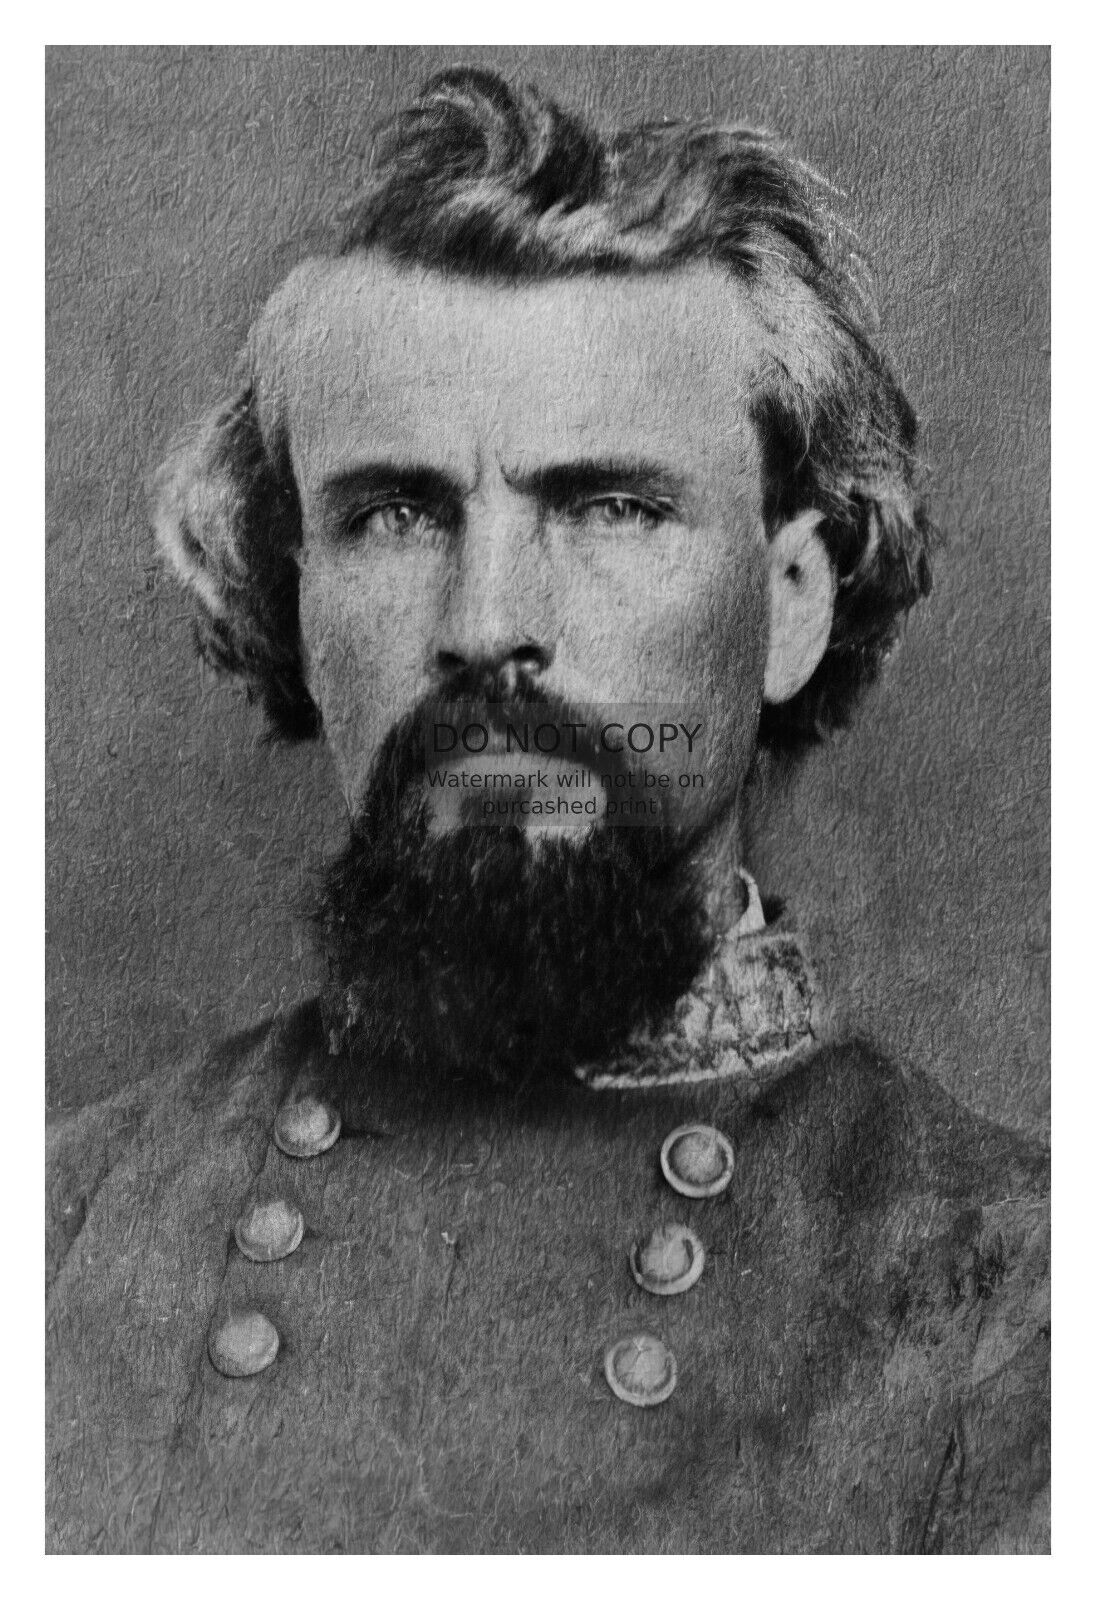 NATHAN BEFORD FORREST CONFEDERATE CIVIL WAR GENERAL IN UNIFORM 4X6 PHOTO